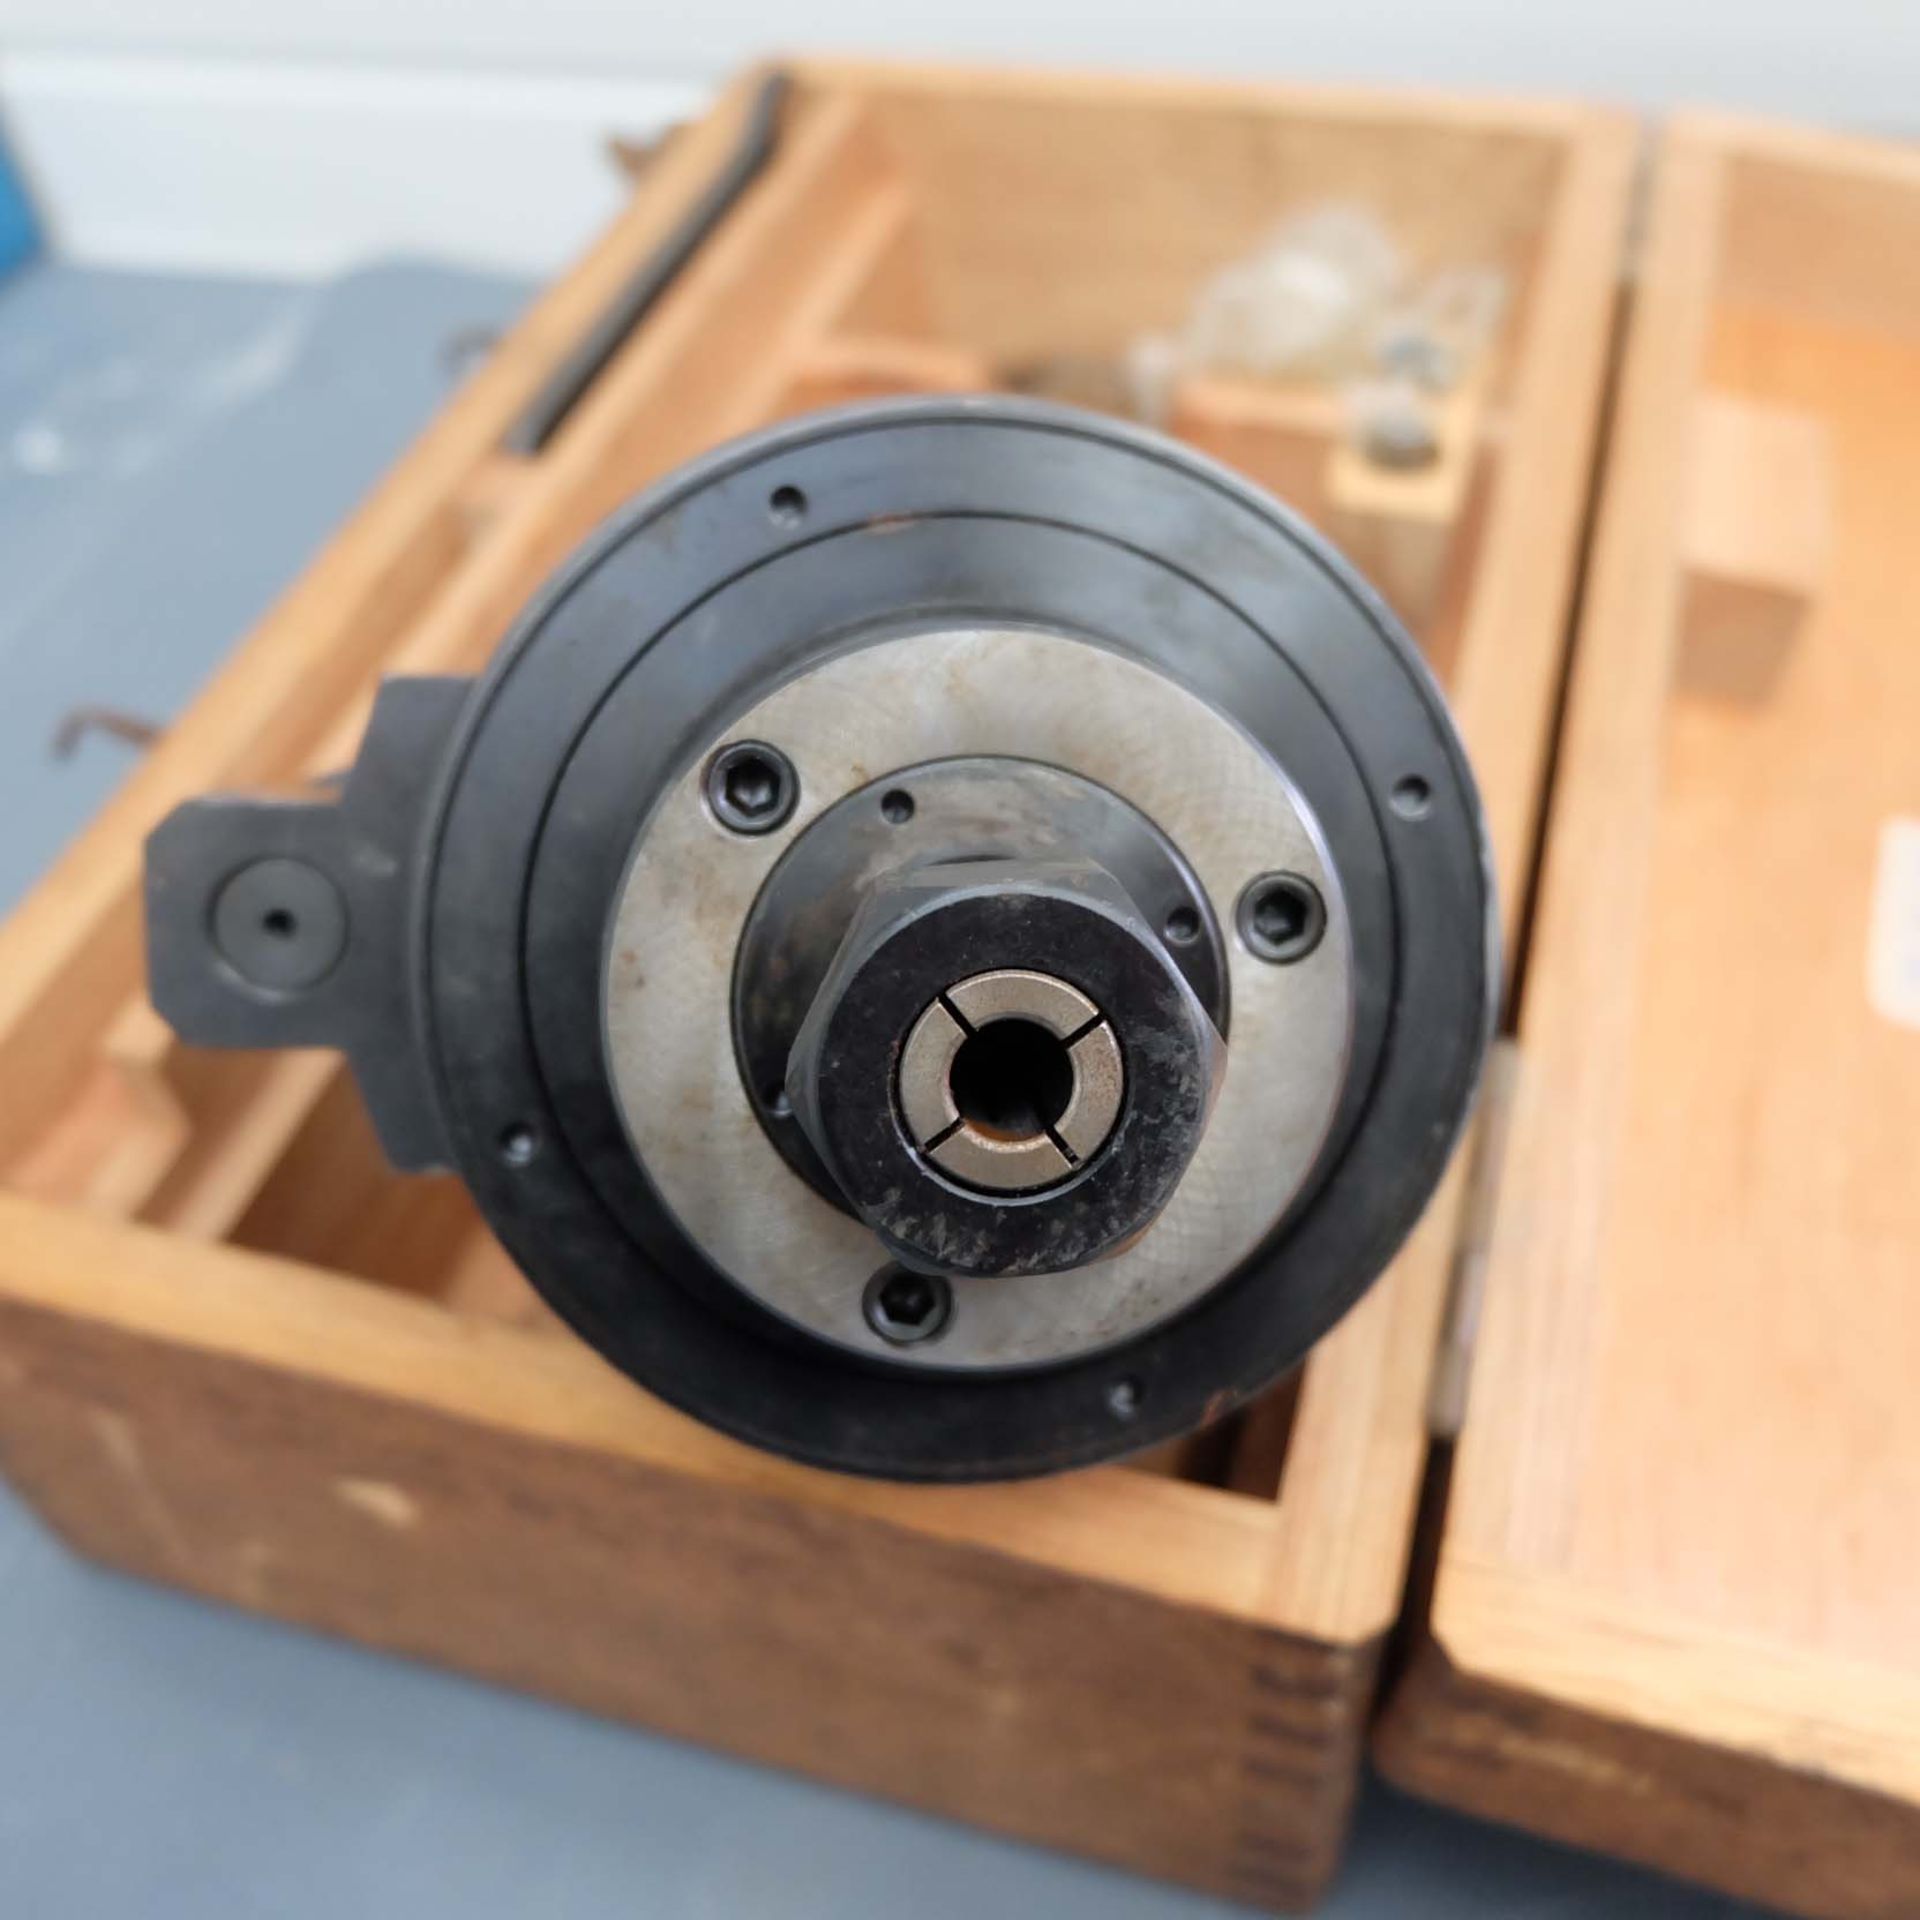 B I G High Spindle - X4G Speed Increaser by Daishower Seiki Co Ltd. With BT50 Spindle. In Wooden Box - Image 3 of 5